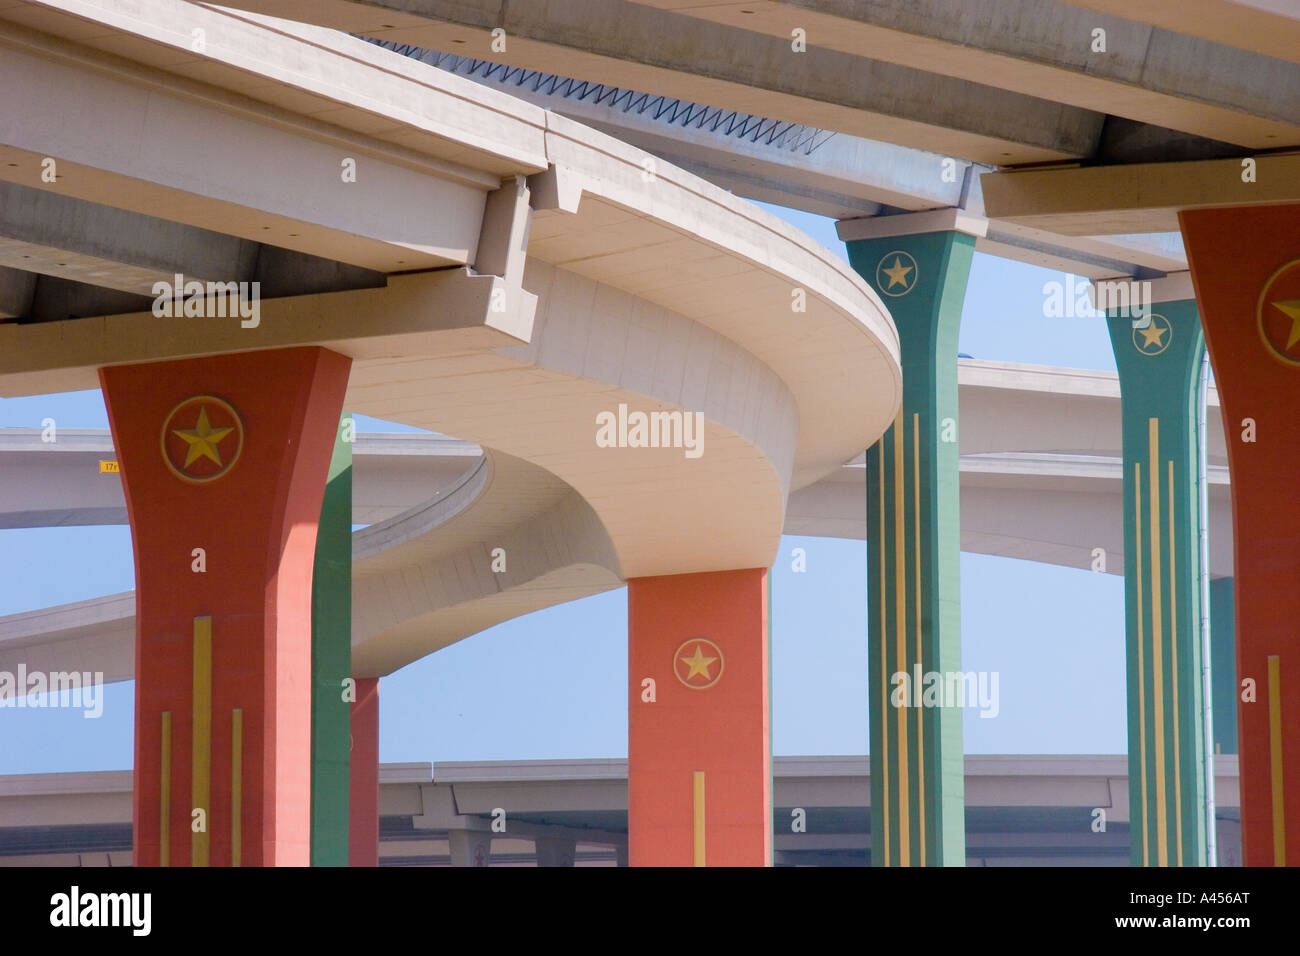 Concrete Pillars, Columns, Displaying Texas Lone Star Support Underpass, Overpass New Construction Dallas High Five Expressway Stock Photo